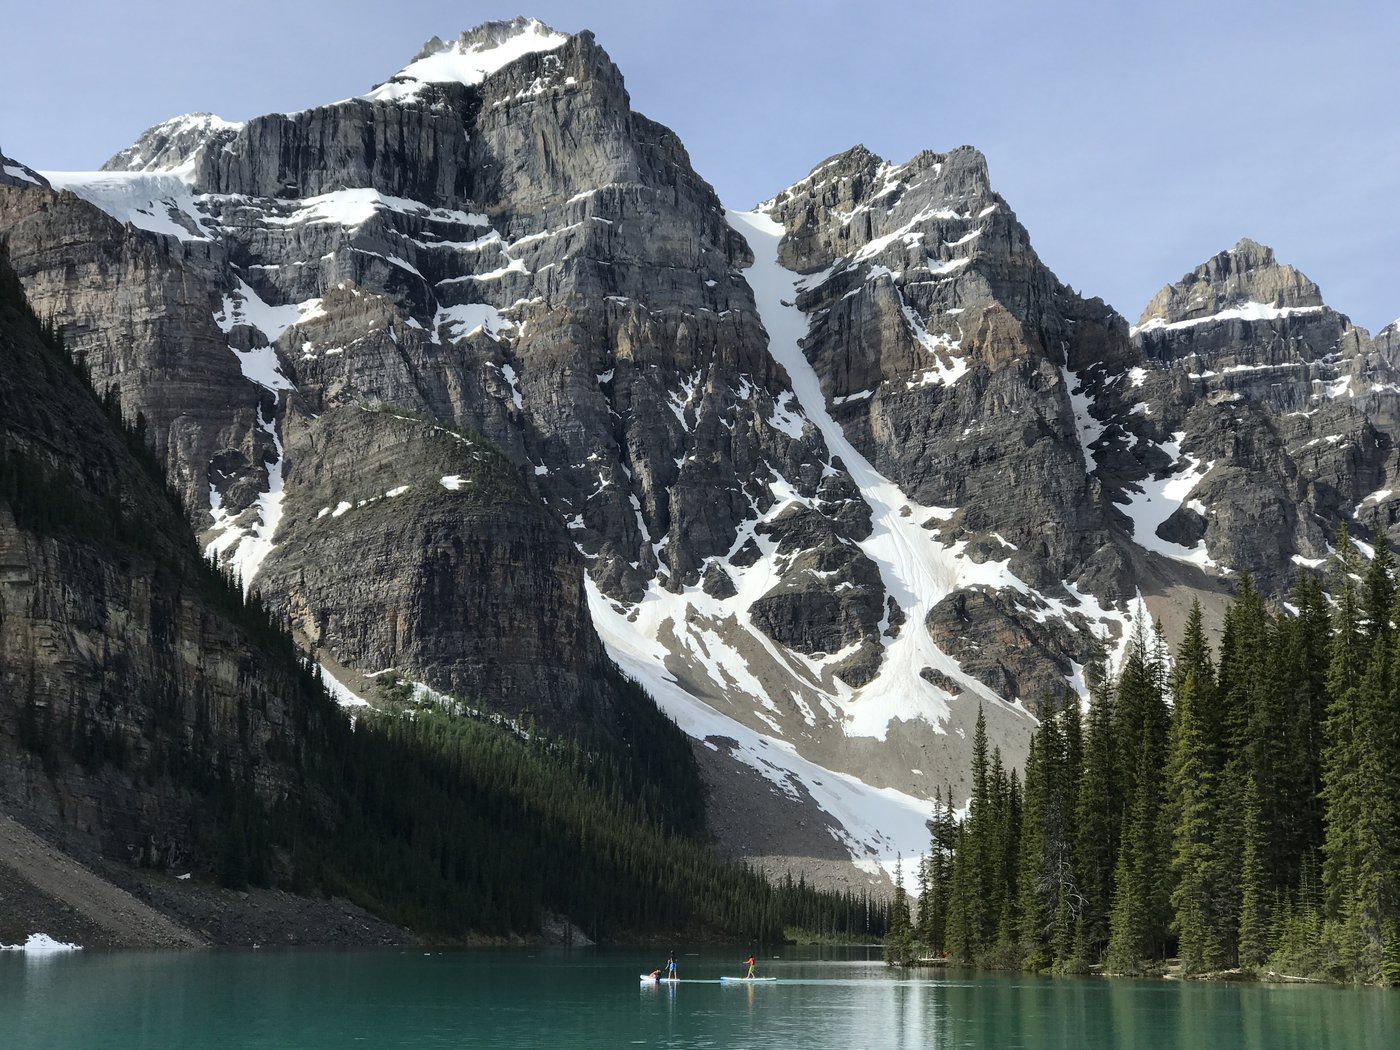 Private vehicles no longer allowed at Banff's iconic Moraine Lake